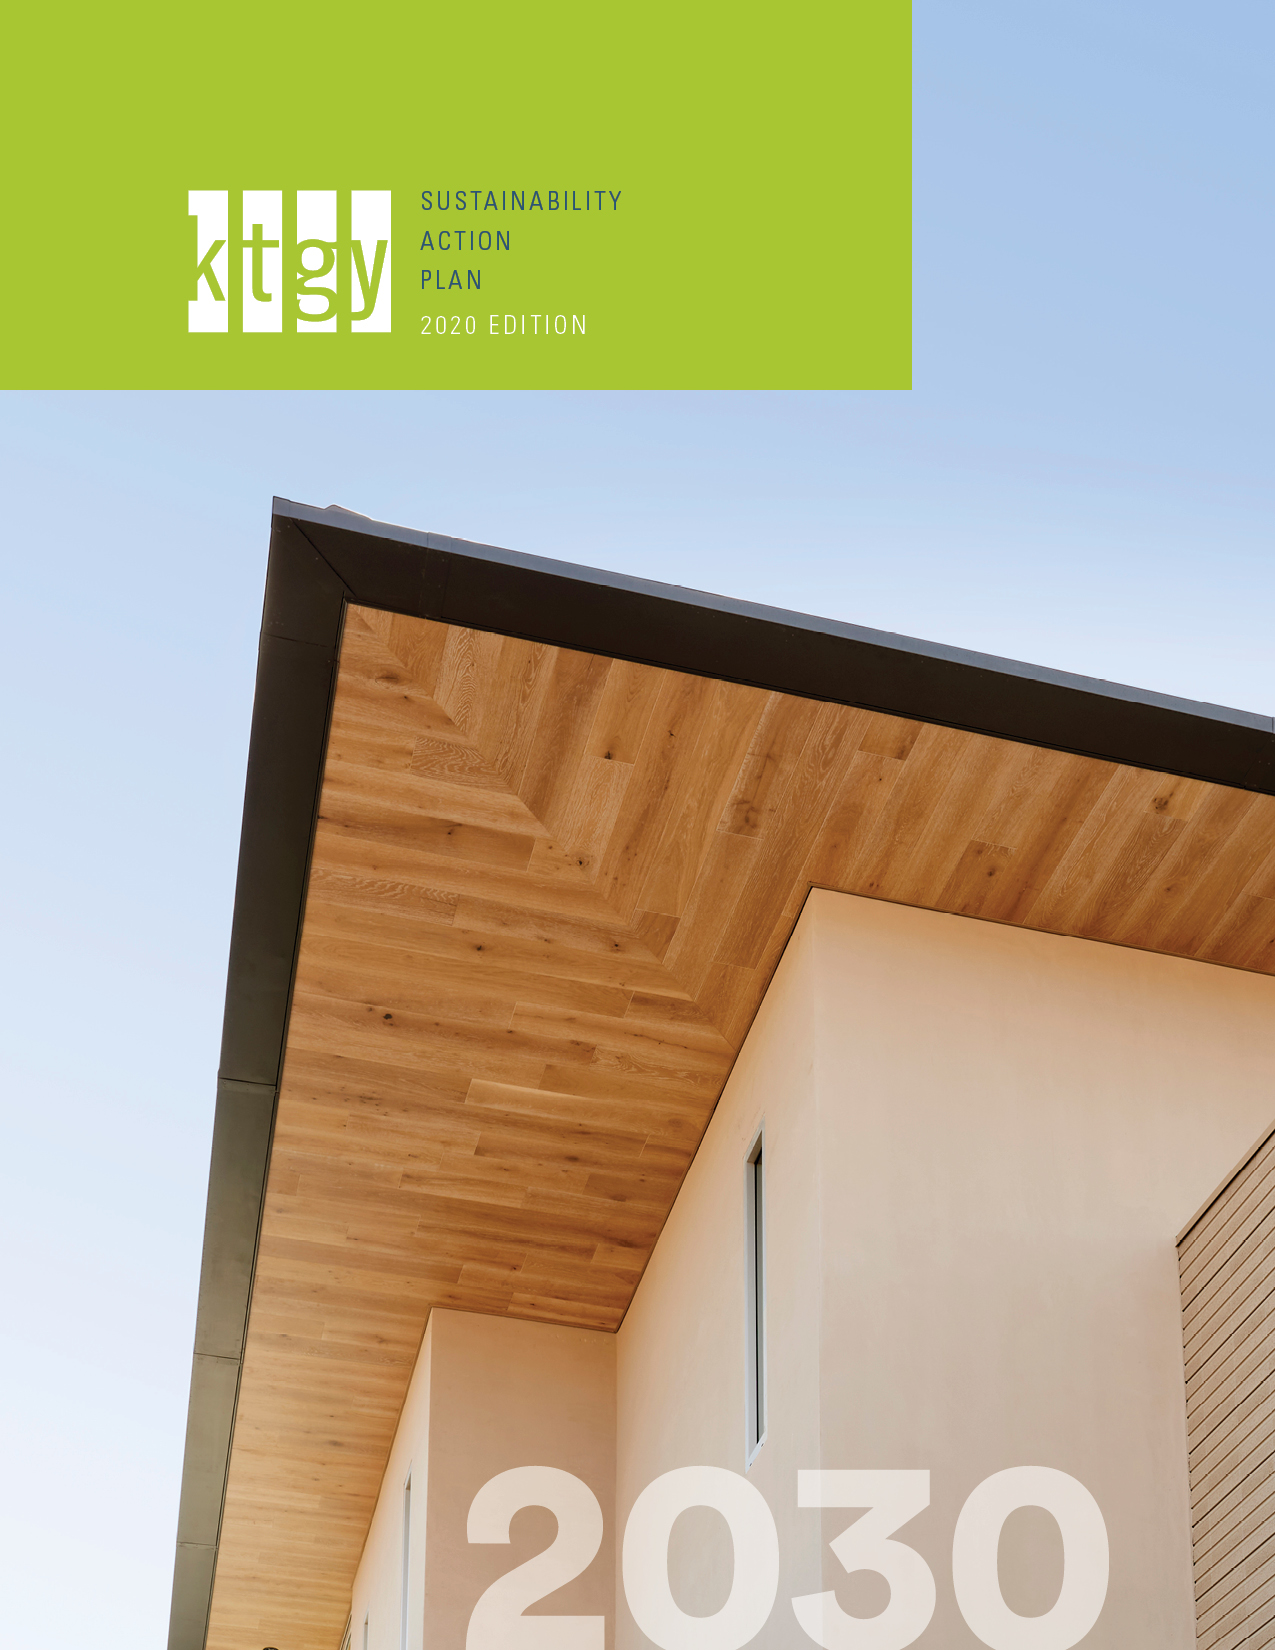 KTGY Joins the AIA 2030 Commitment and Releases its Sustainability Action Plan